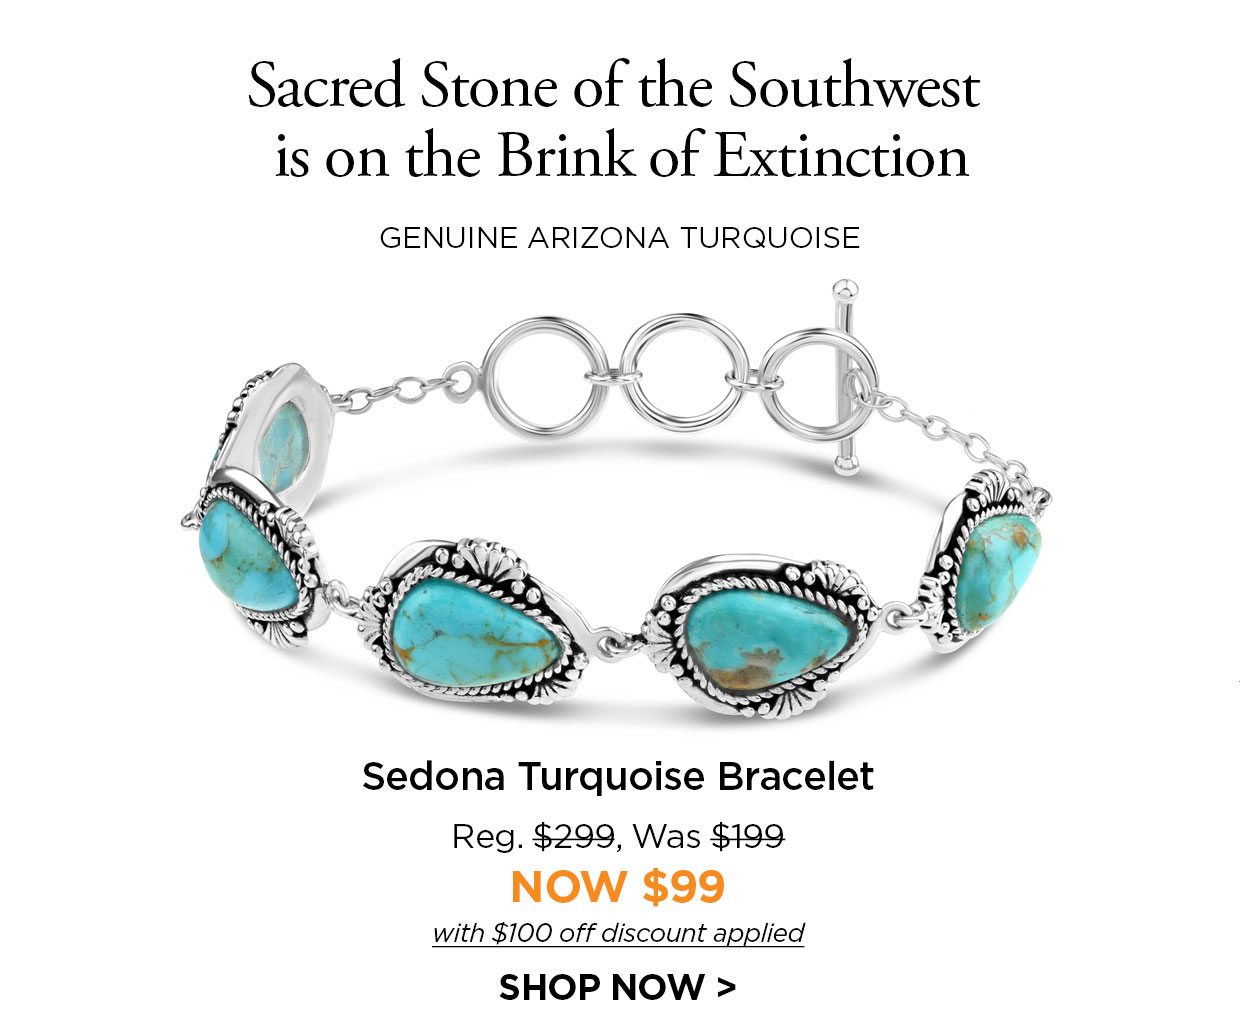 Sacred Stone of the Southwest is on the Brink of Extinction. GENUINE ARIZONA TURQUOISE. Sedona Turquoise Bracelet Reg. $299, Was $199, NOW $99 with $100 off discount applied